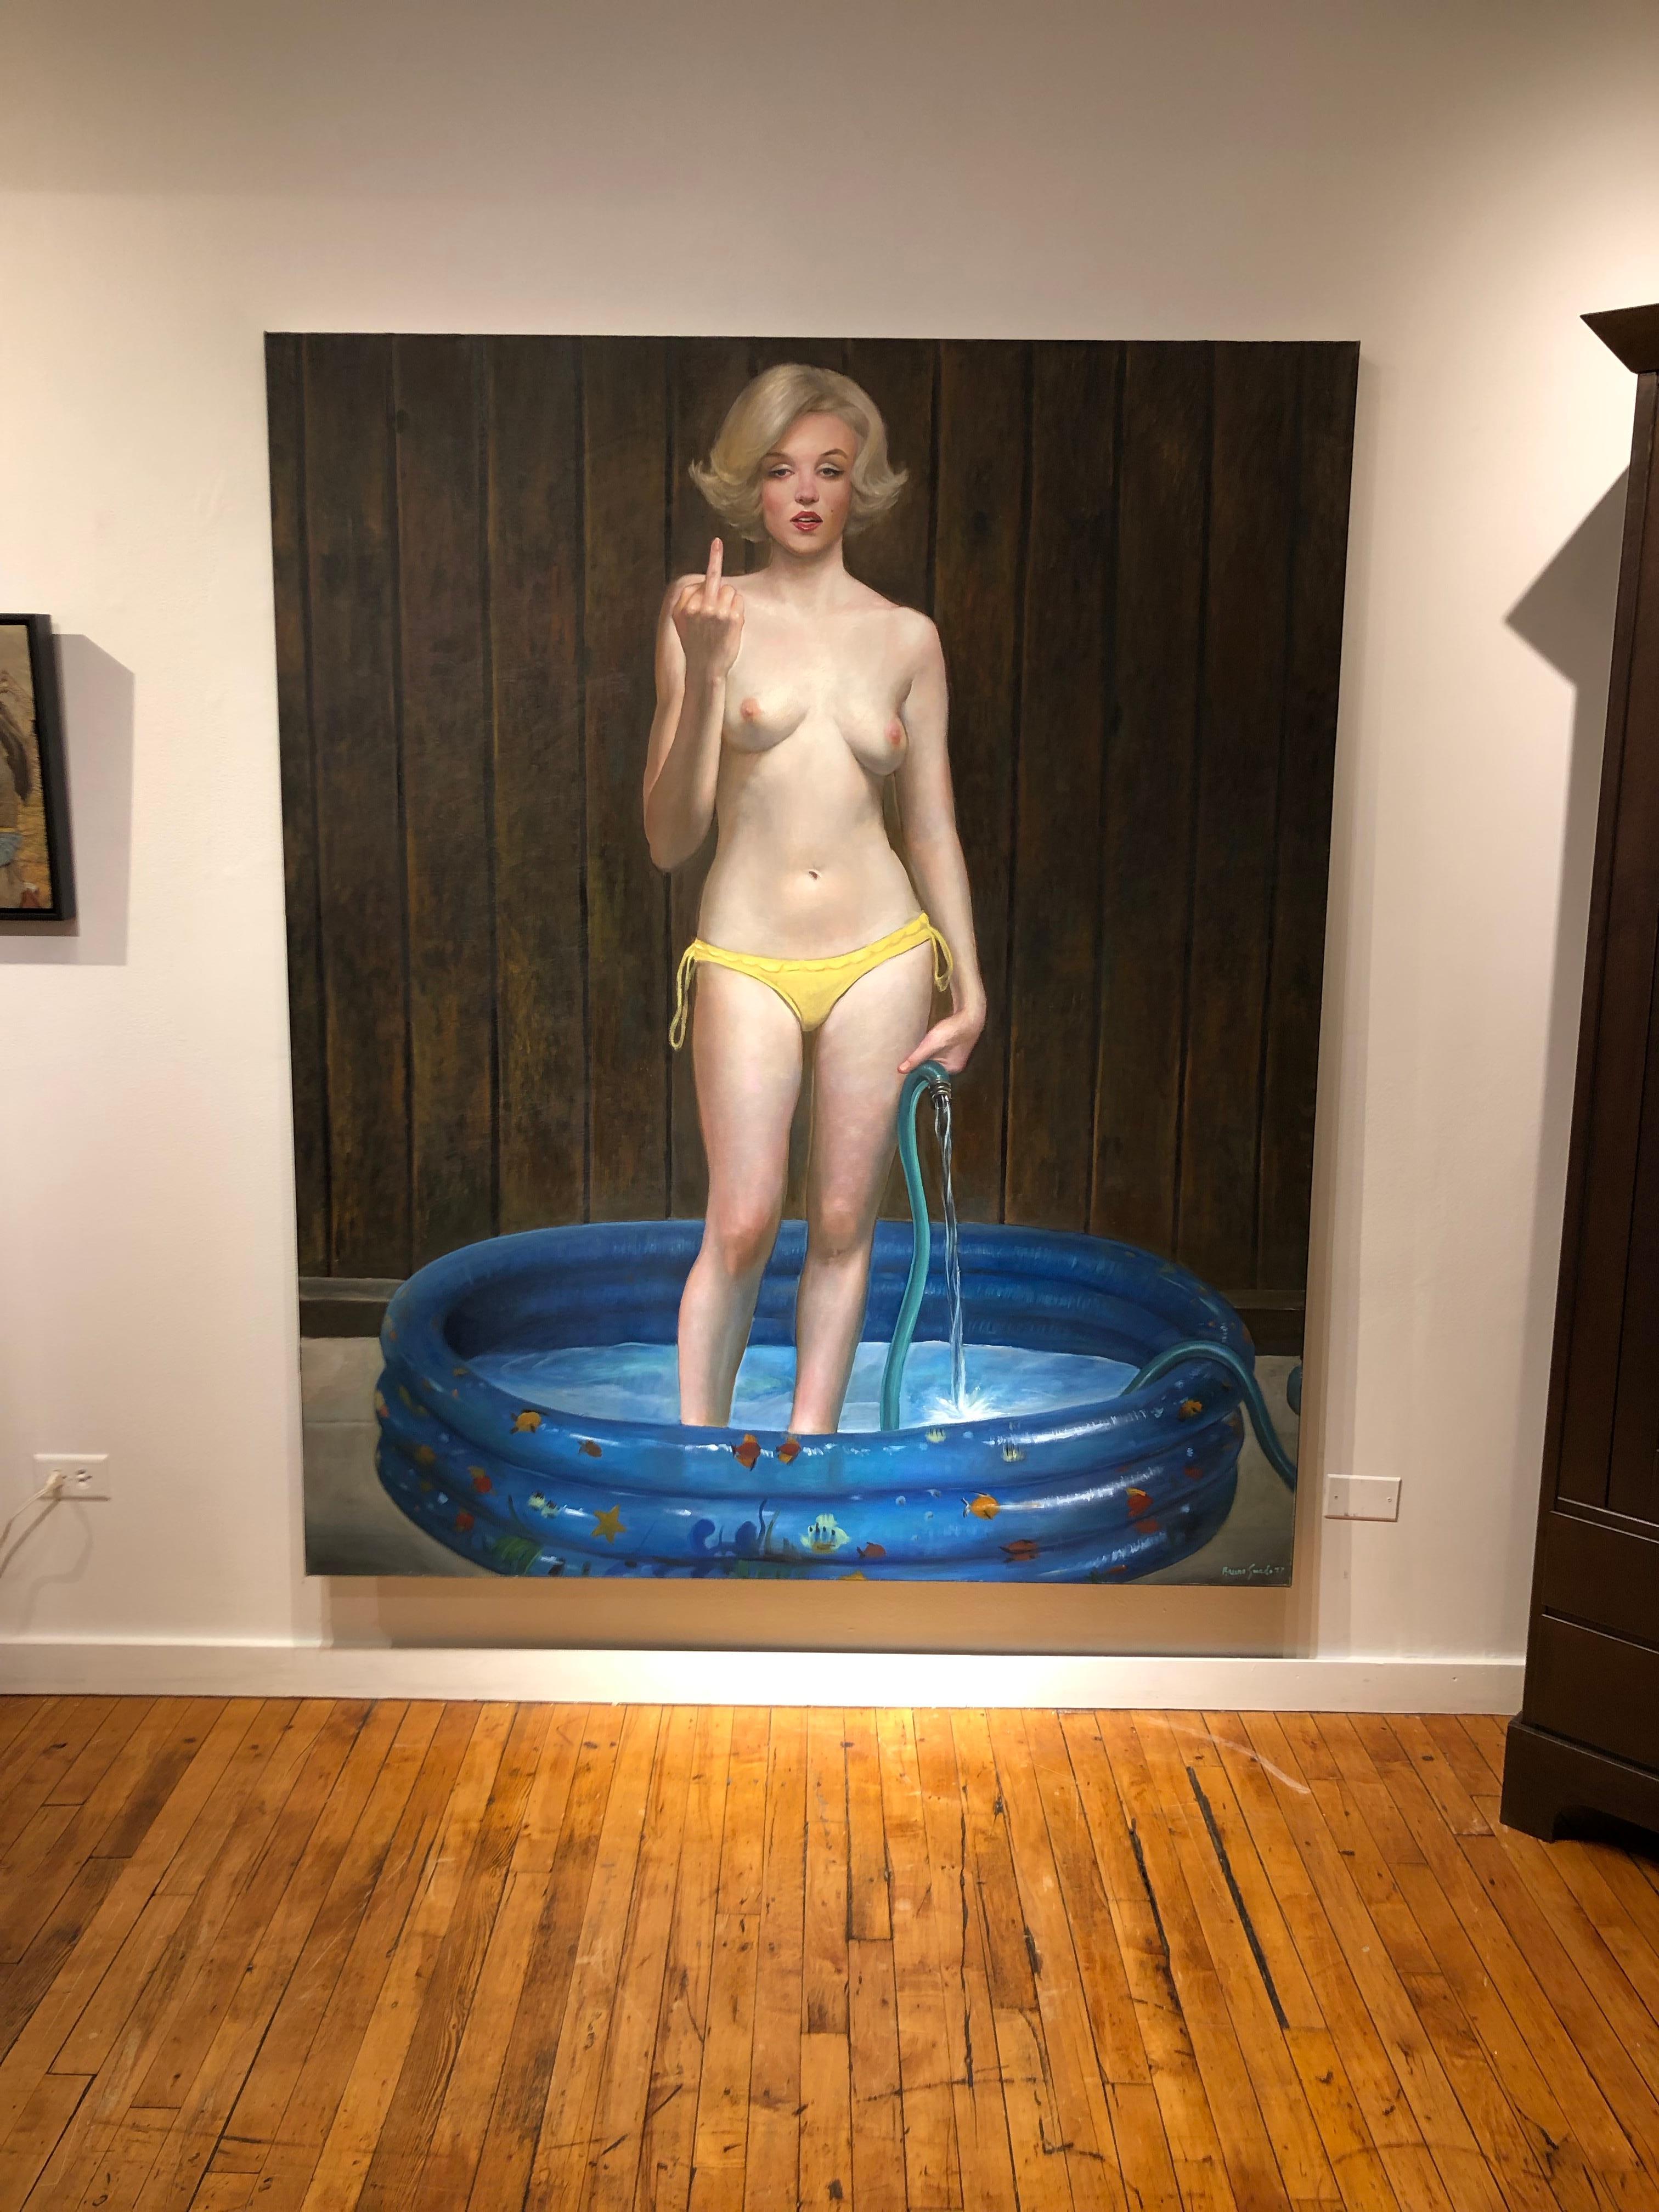 Get Out! - Large Scale Oil Painting of Marilyn Monroe Standing in a Kiddie Pool 2